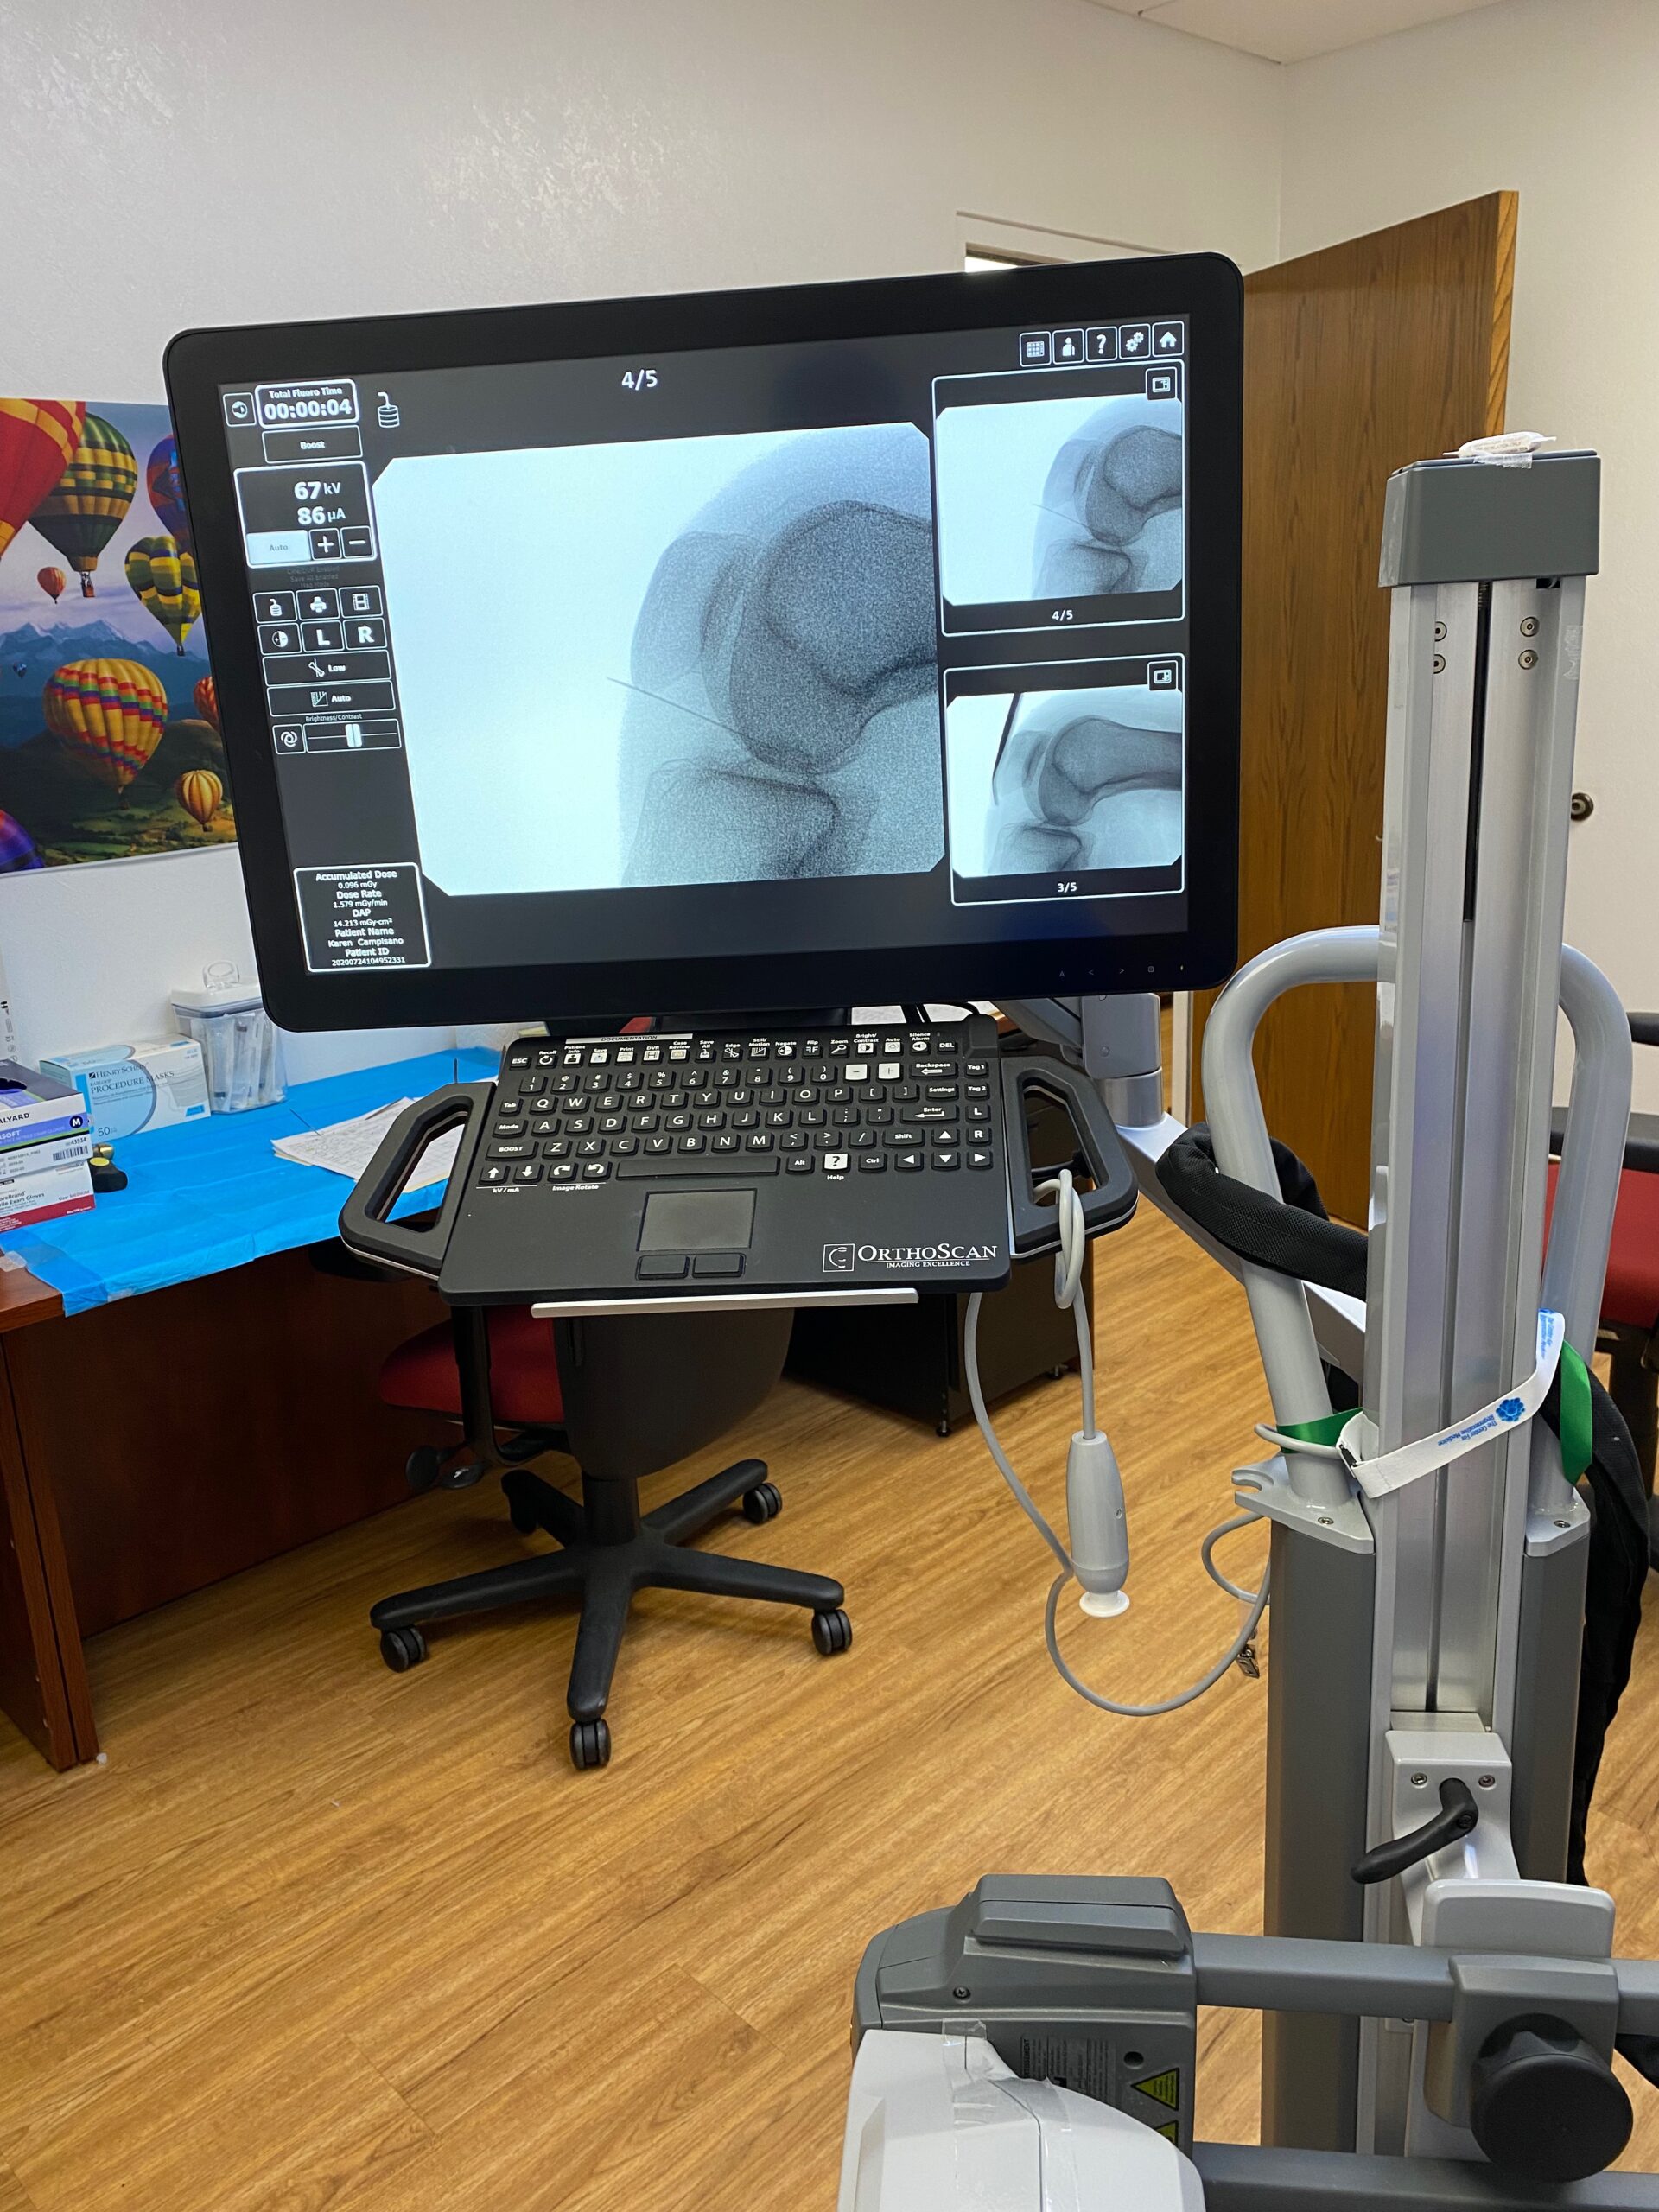 Injecting a patient at Kentuckiana Integrative Medicine Local Louisville Jeffersonville Office using the Orthoscan Machine